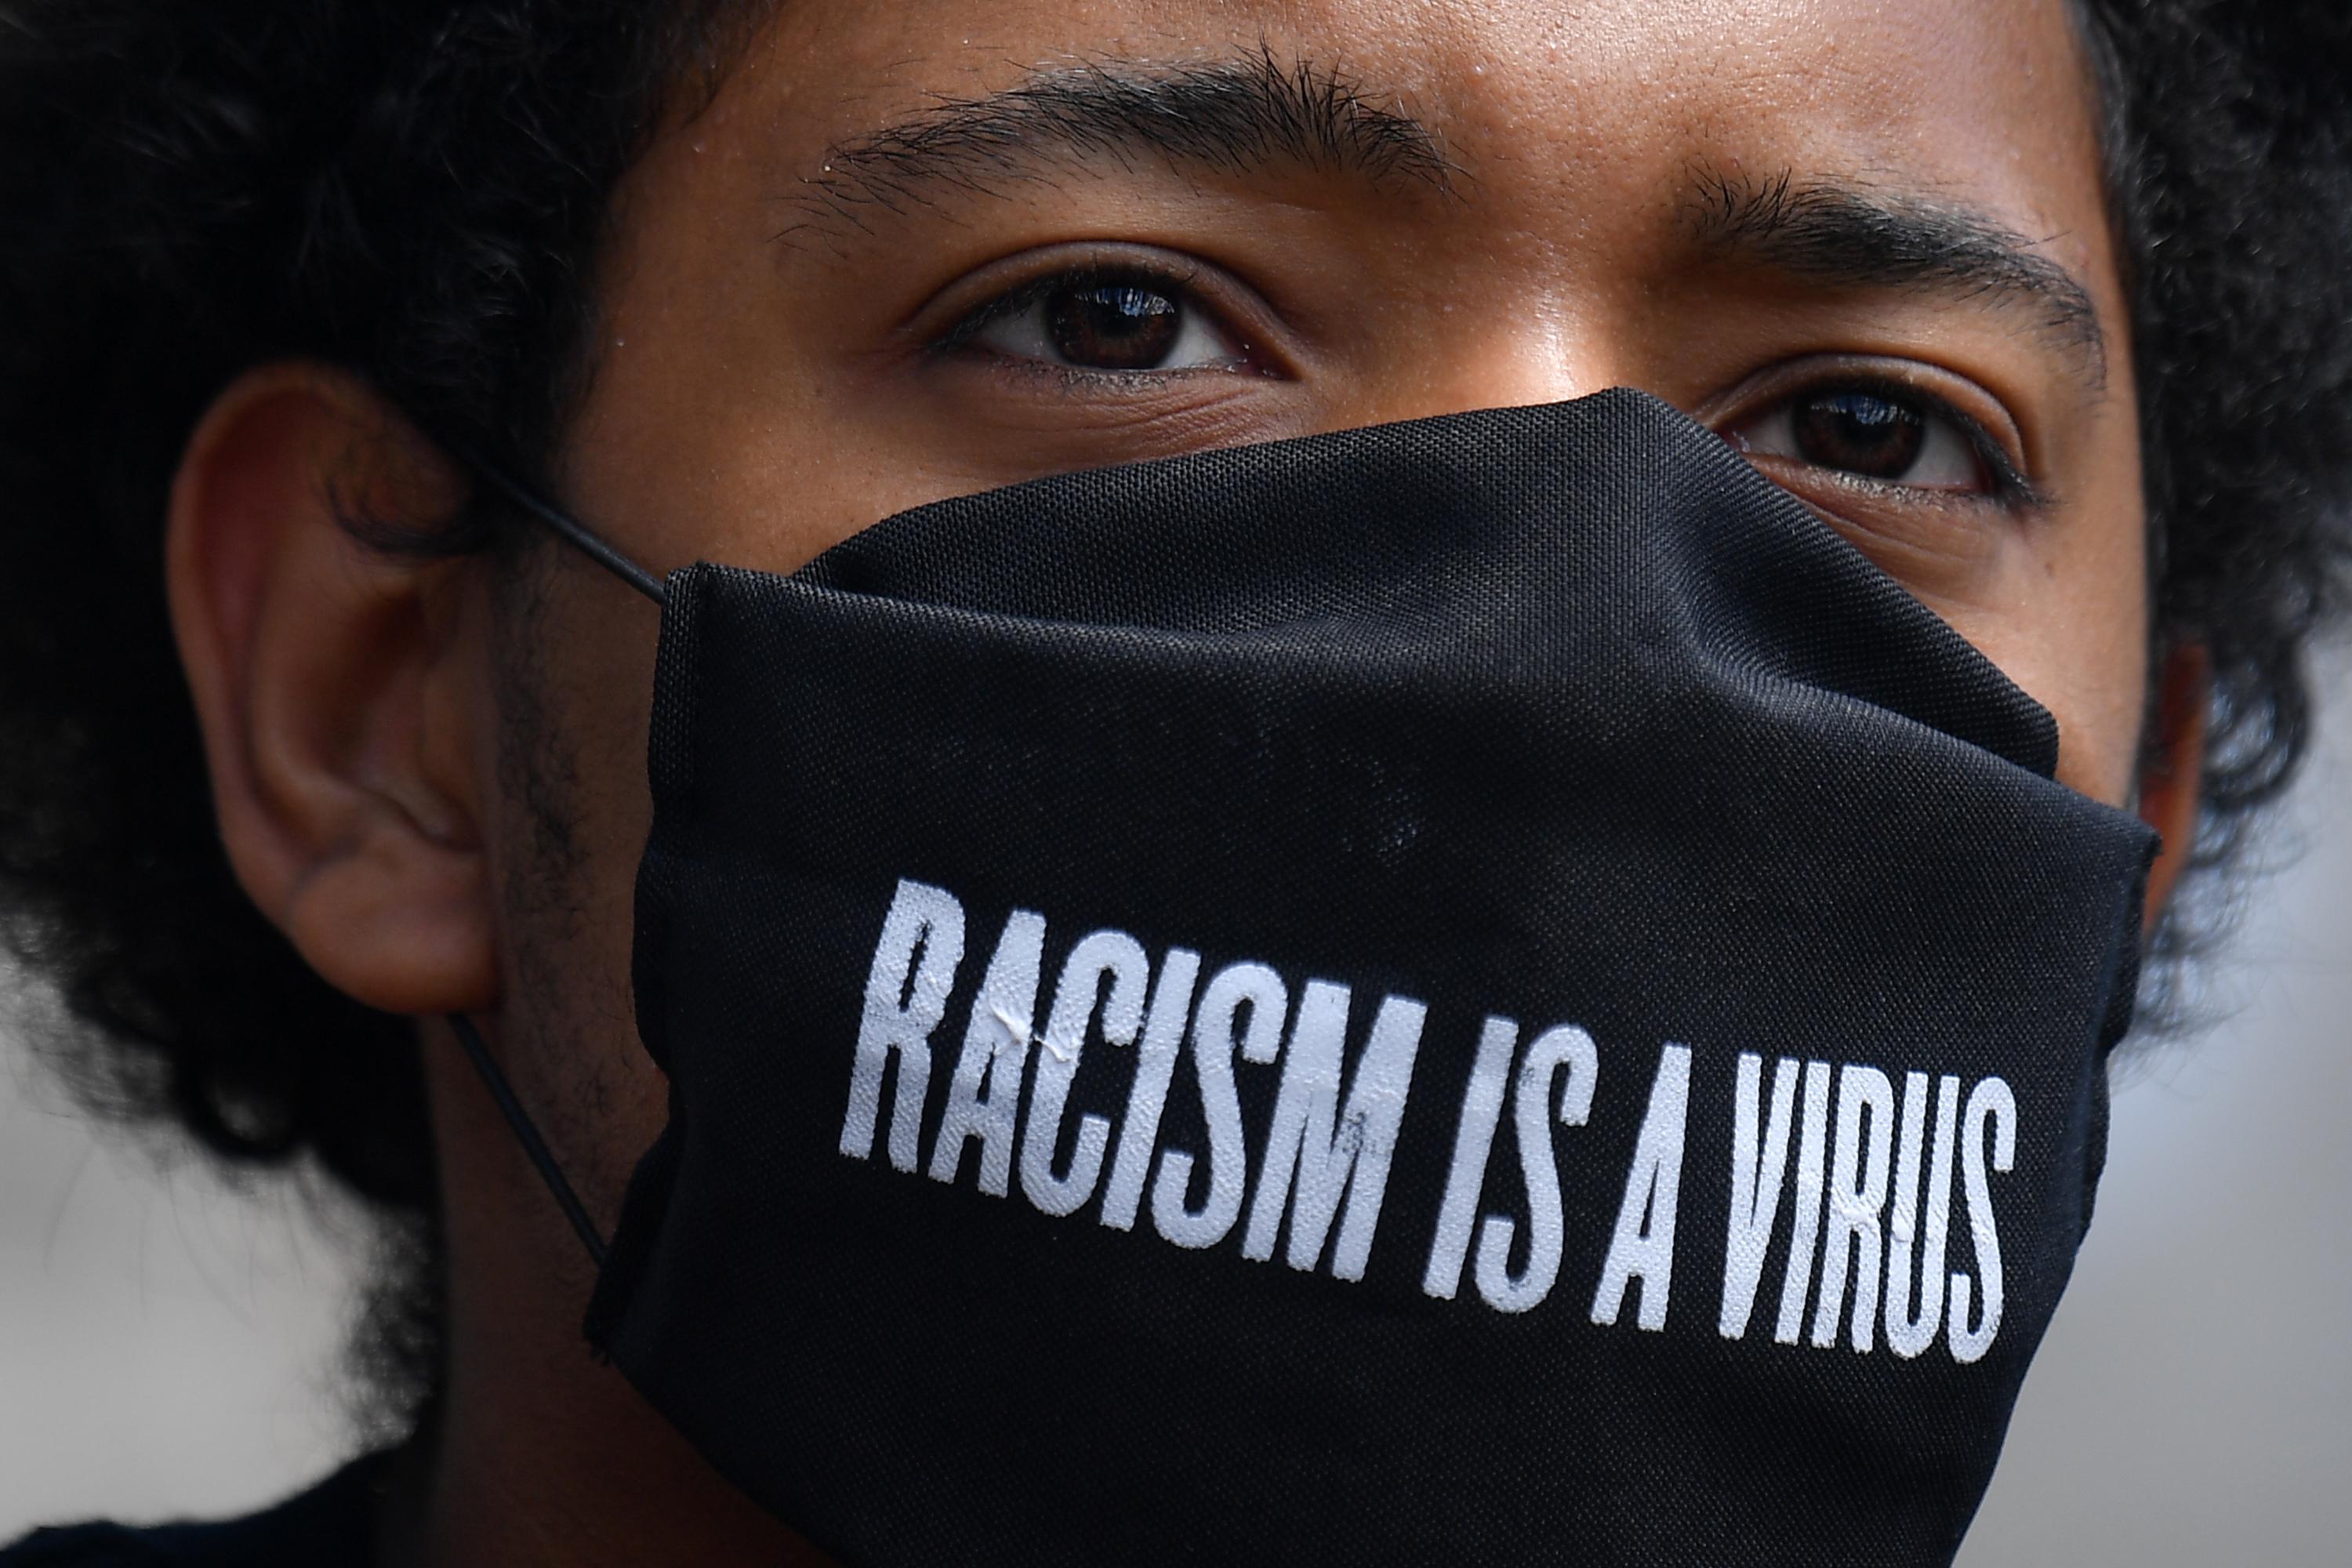 A protester wears a protective face covering with the slogan "Racism is a Virus" written on the fabric as he listens to speeches at a gathering in support of the Black Lives Matter movement at Marble Arch in London on July 5, 2020.